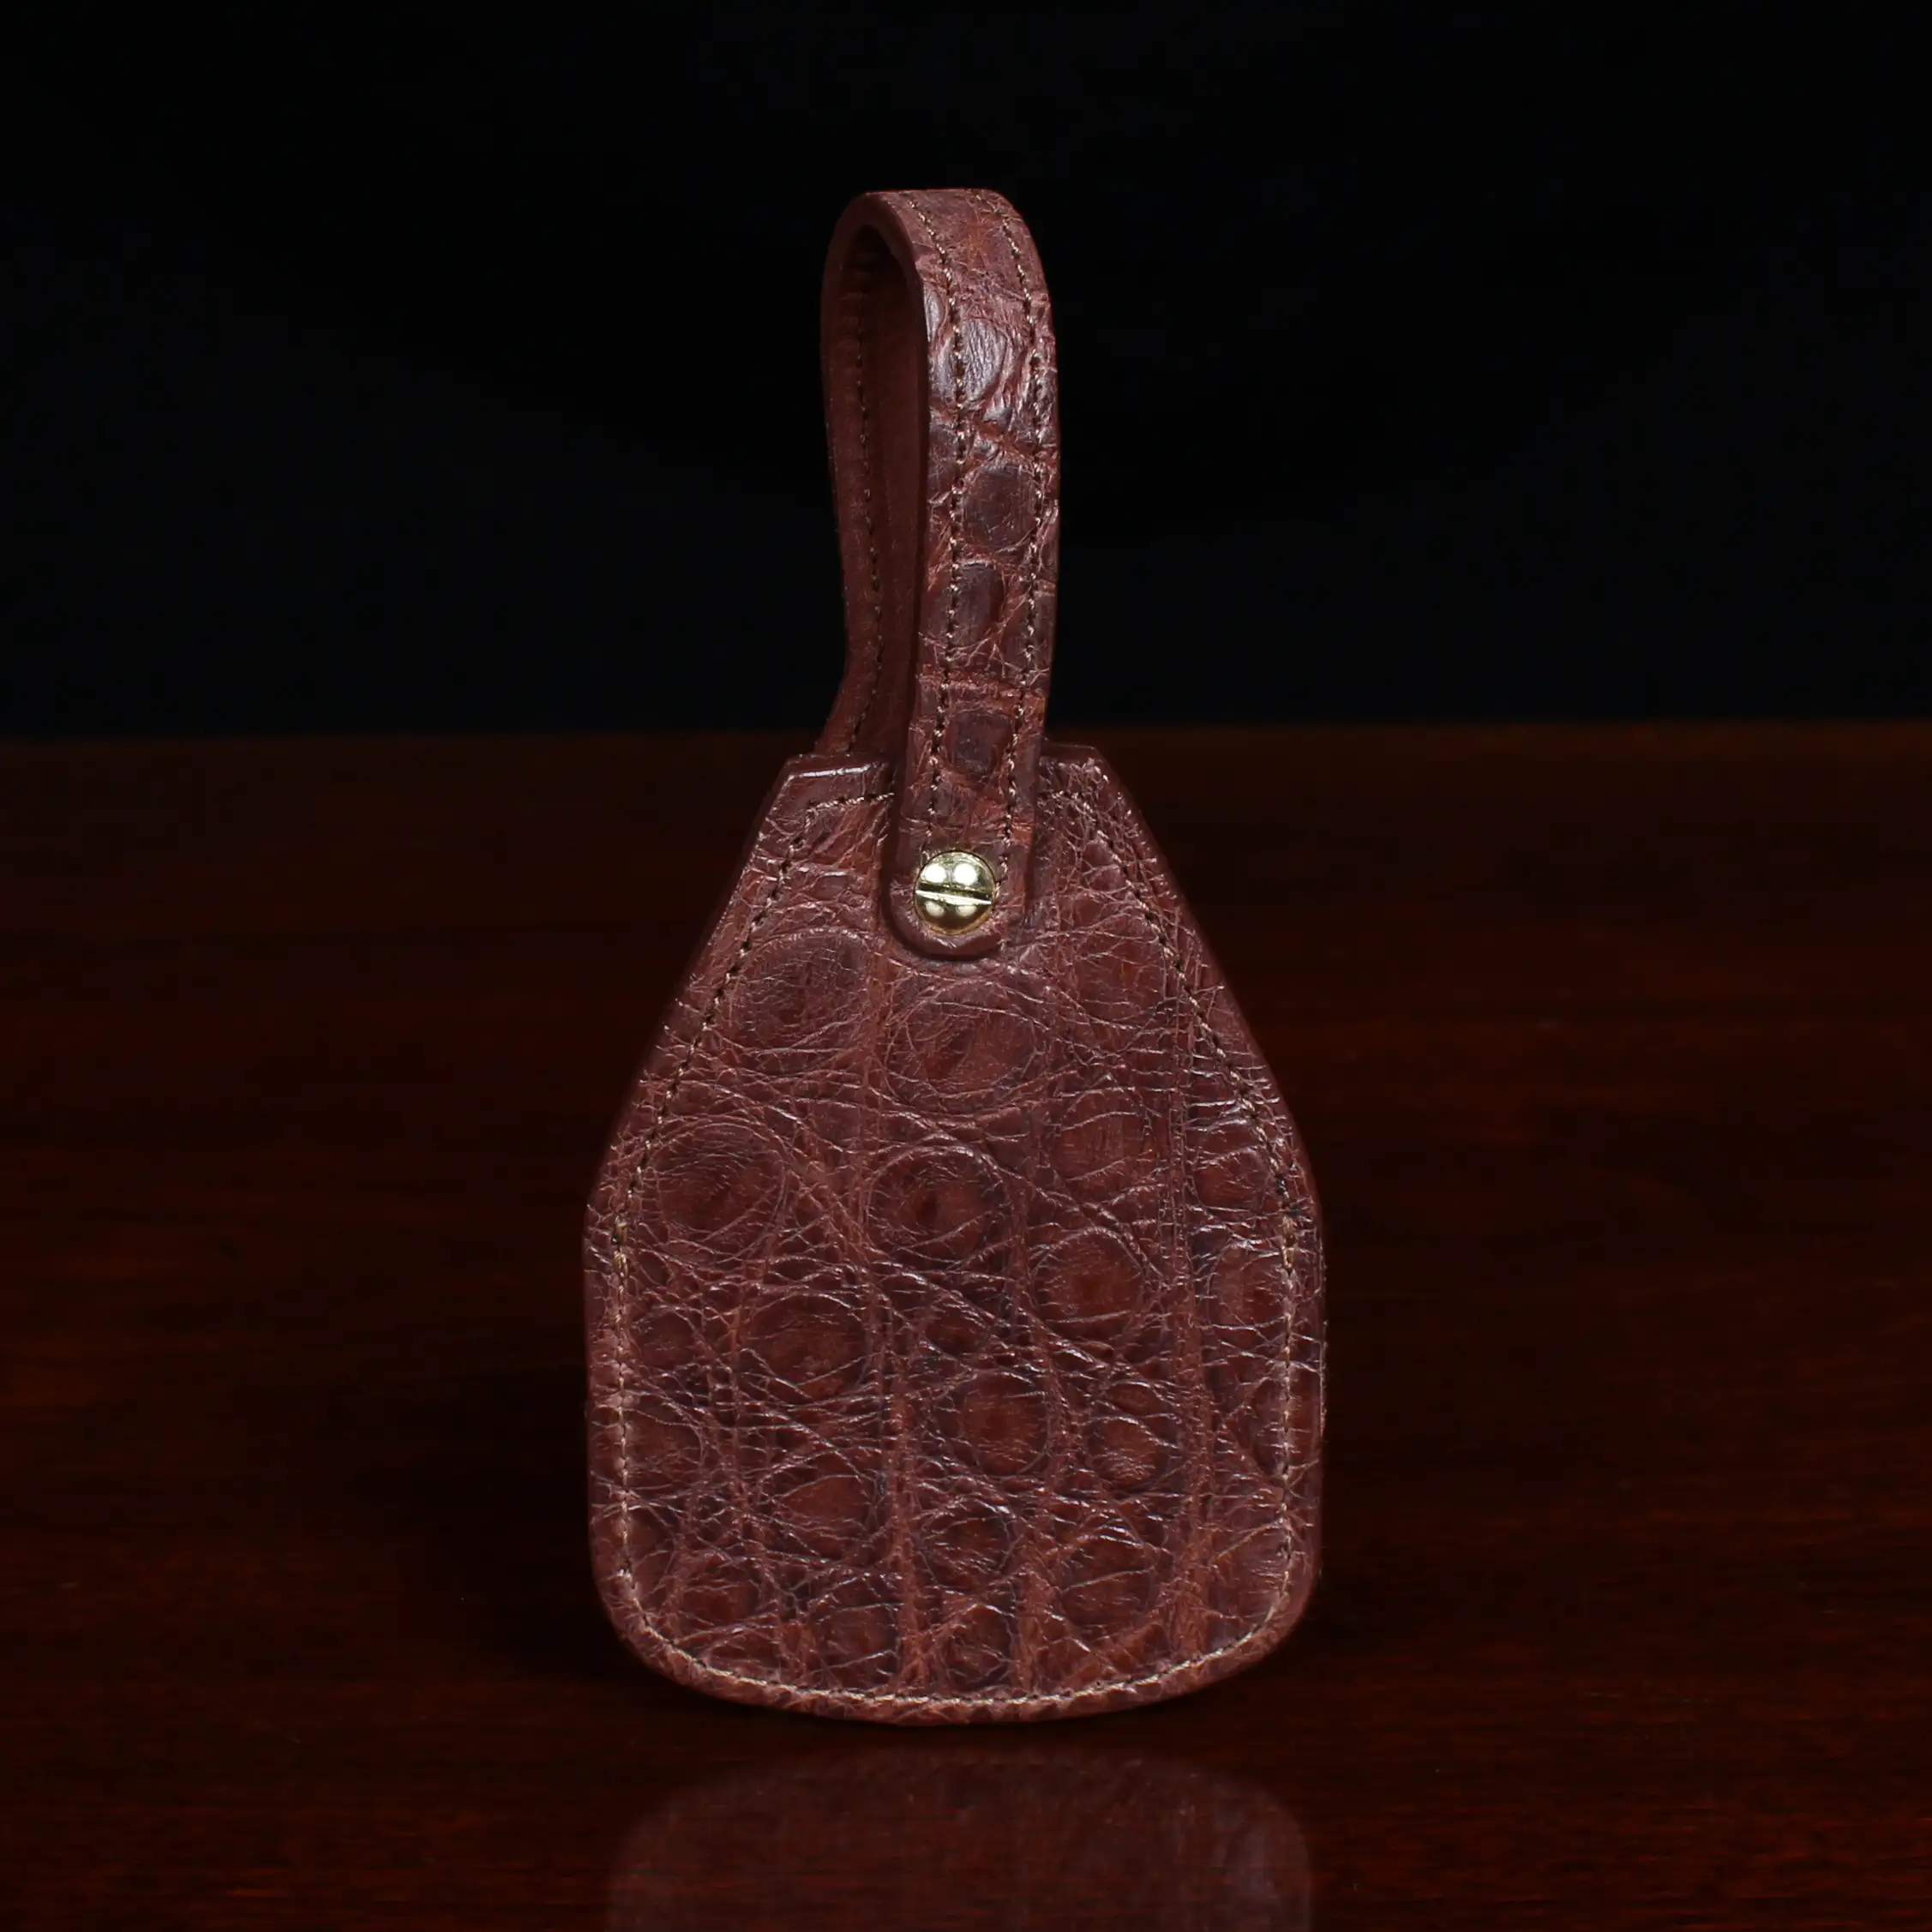 Vintage Natural Monogram Leather Luggage Tag by Louis Vuitton